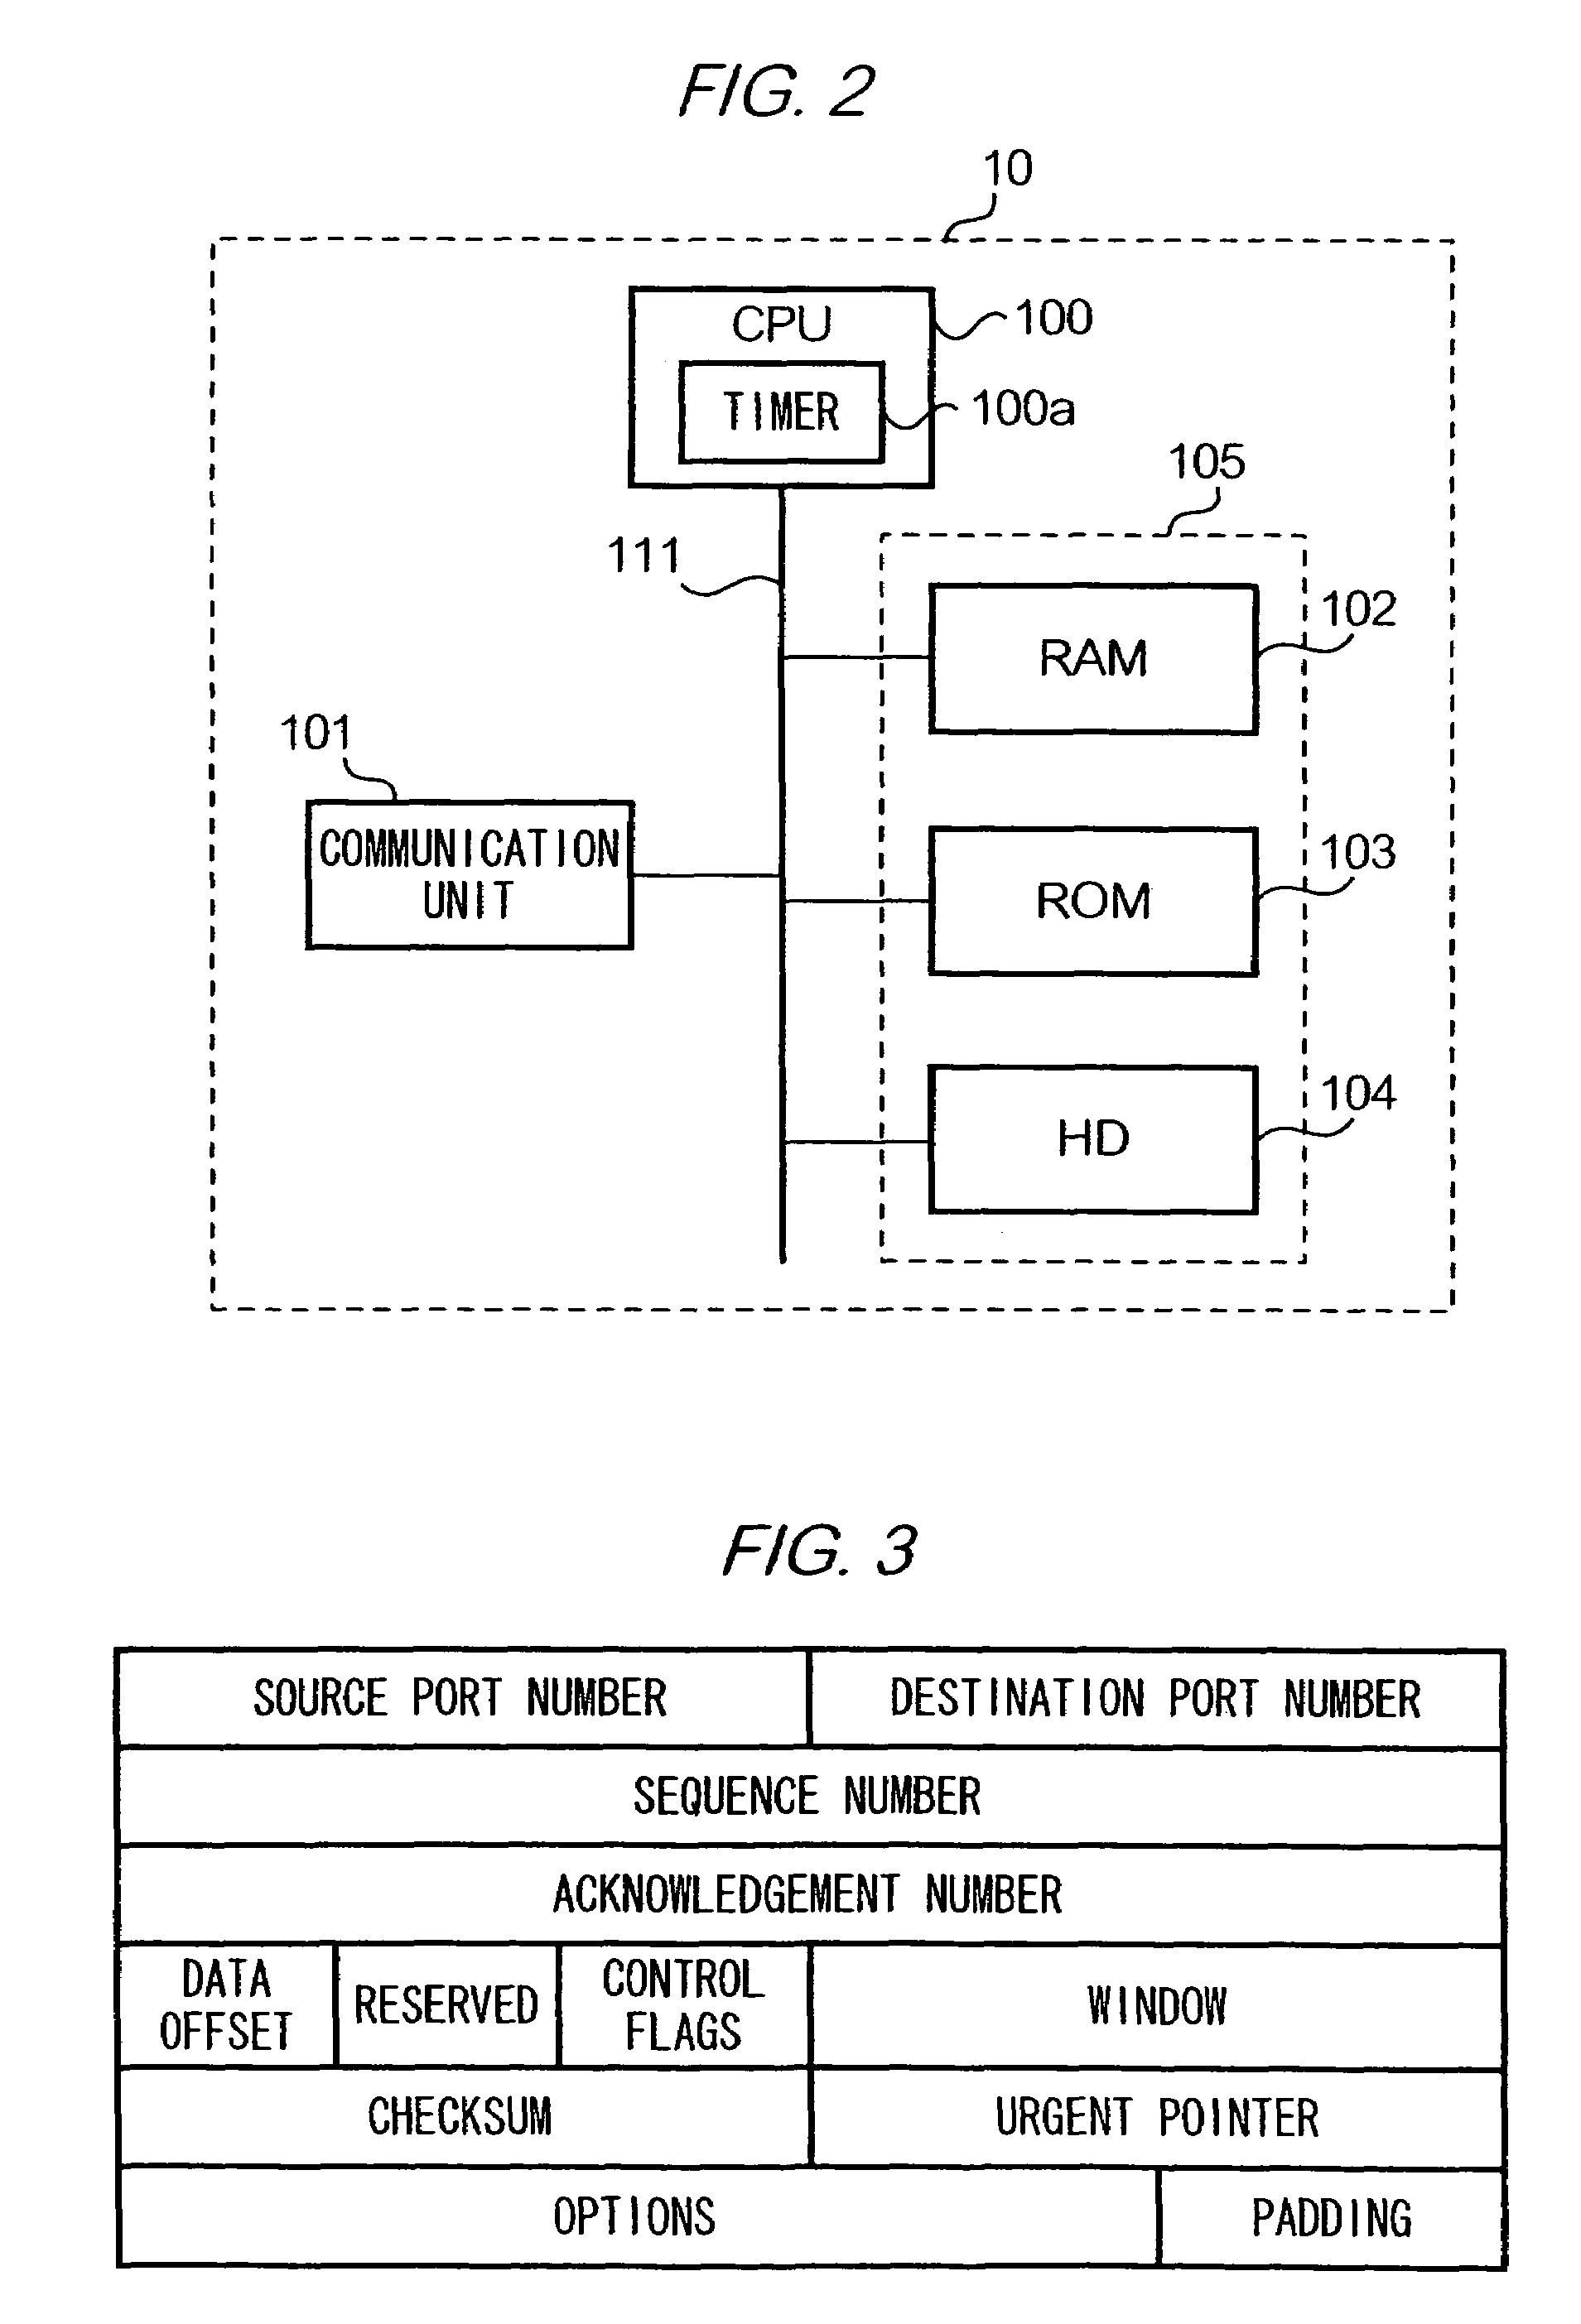 Transmission control method and system